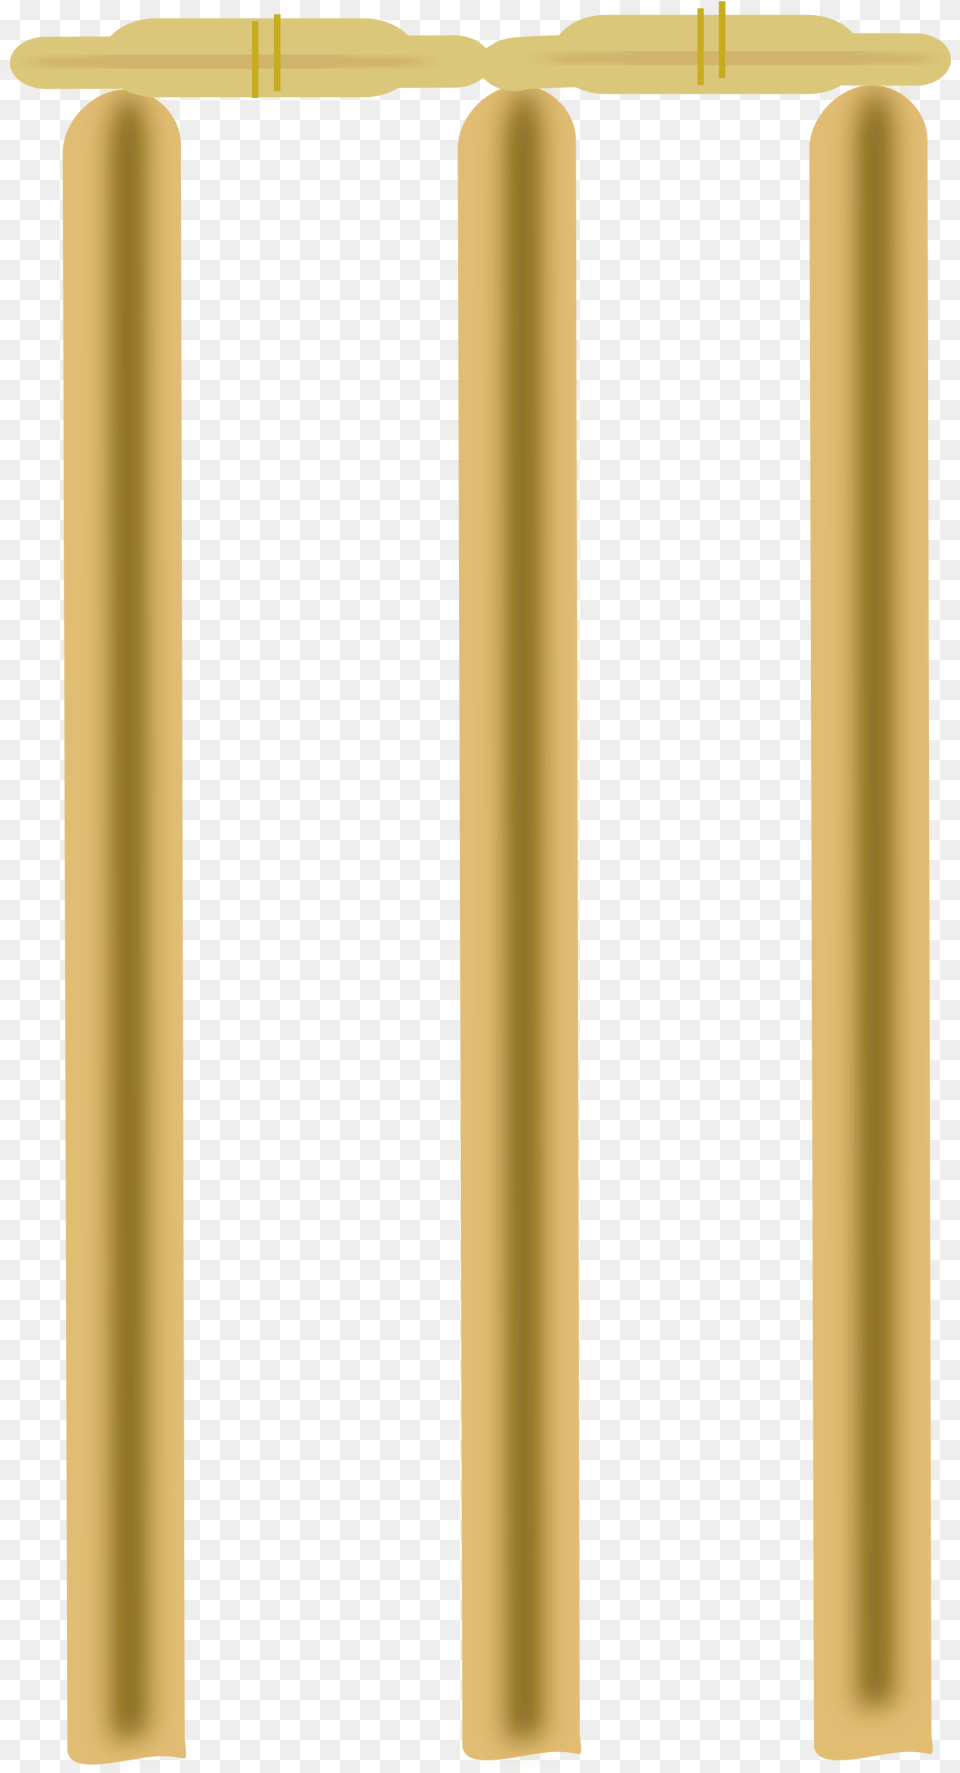 Big Image Clipart Of Cricket Stumps, Architecture, Pillar Png